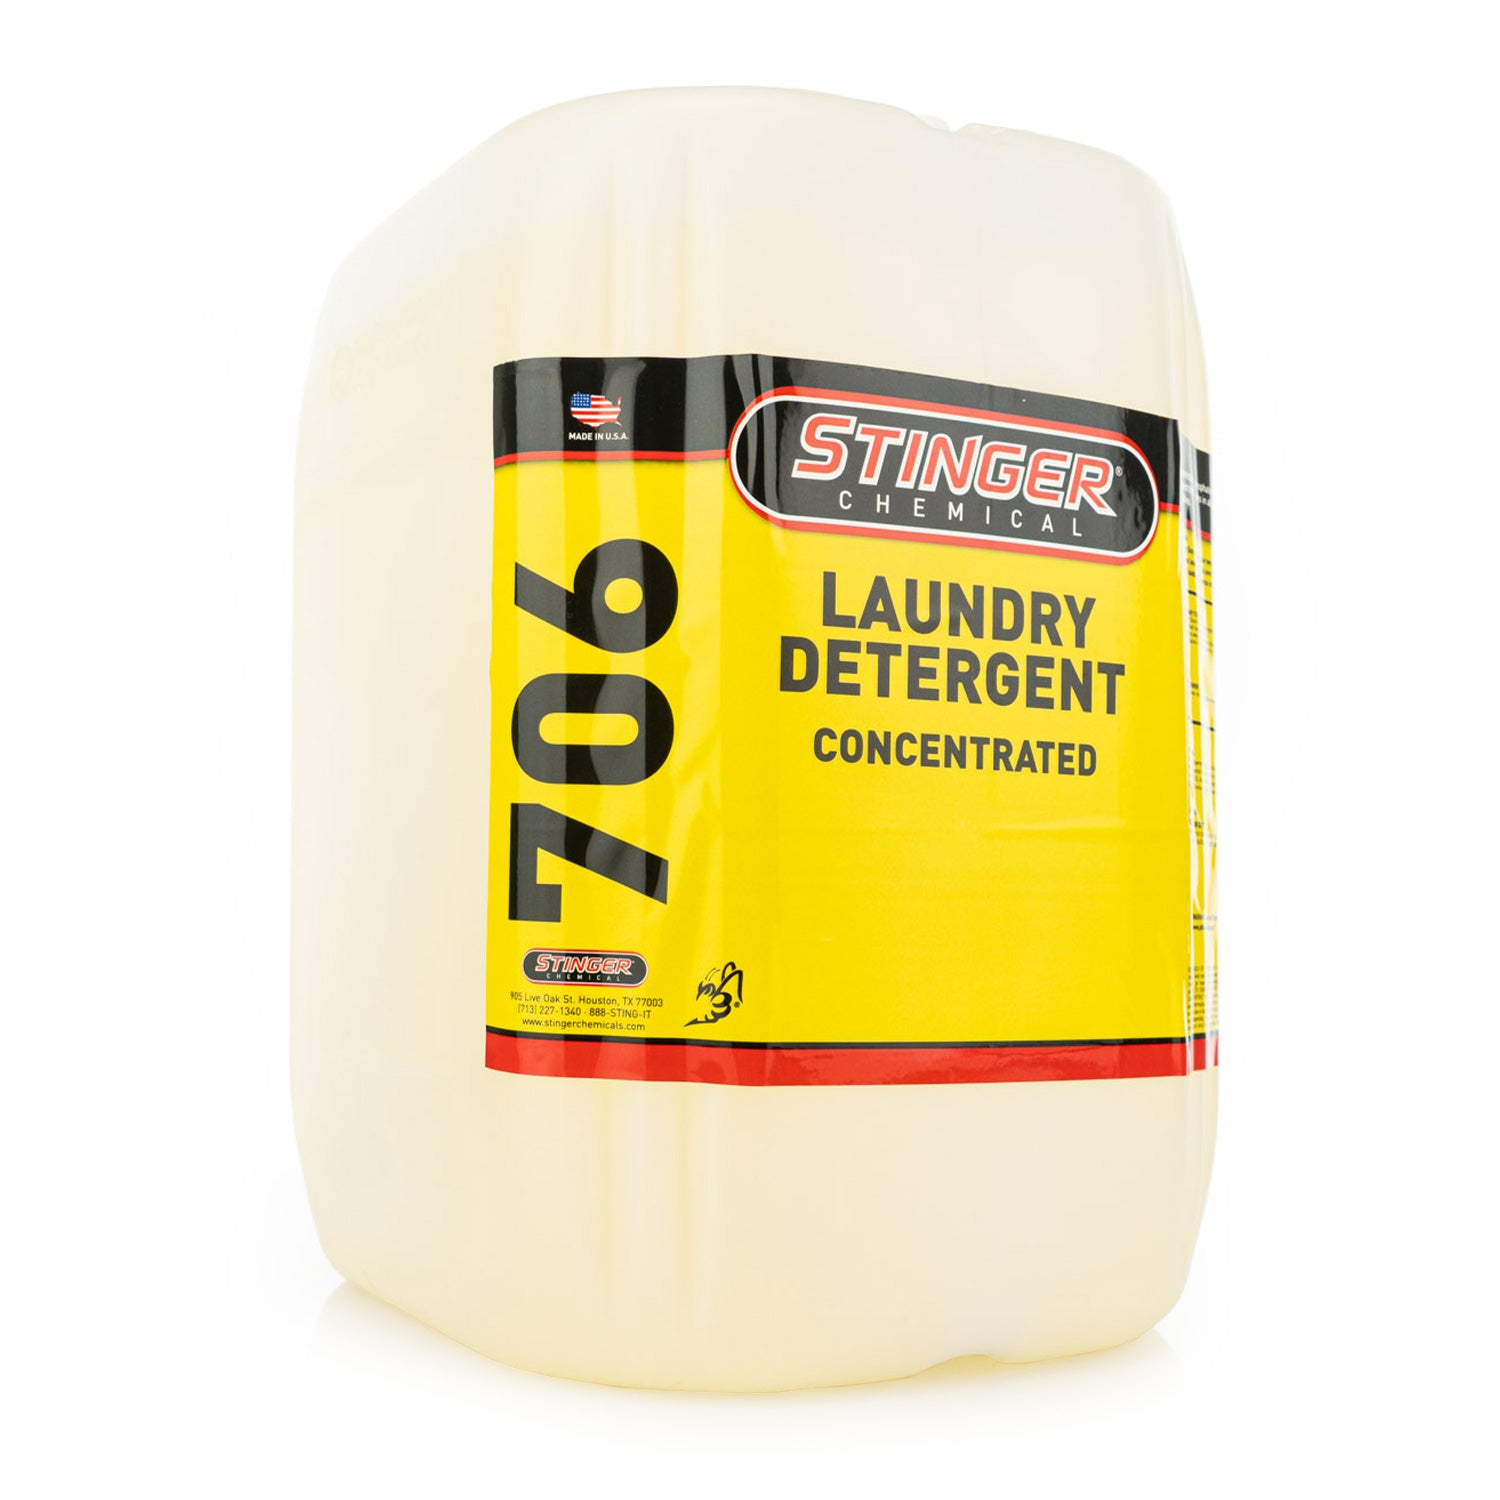 Rags To Riches - Microfiber Detergent